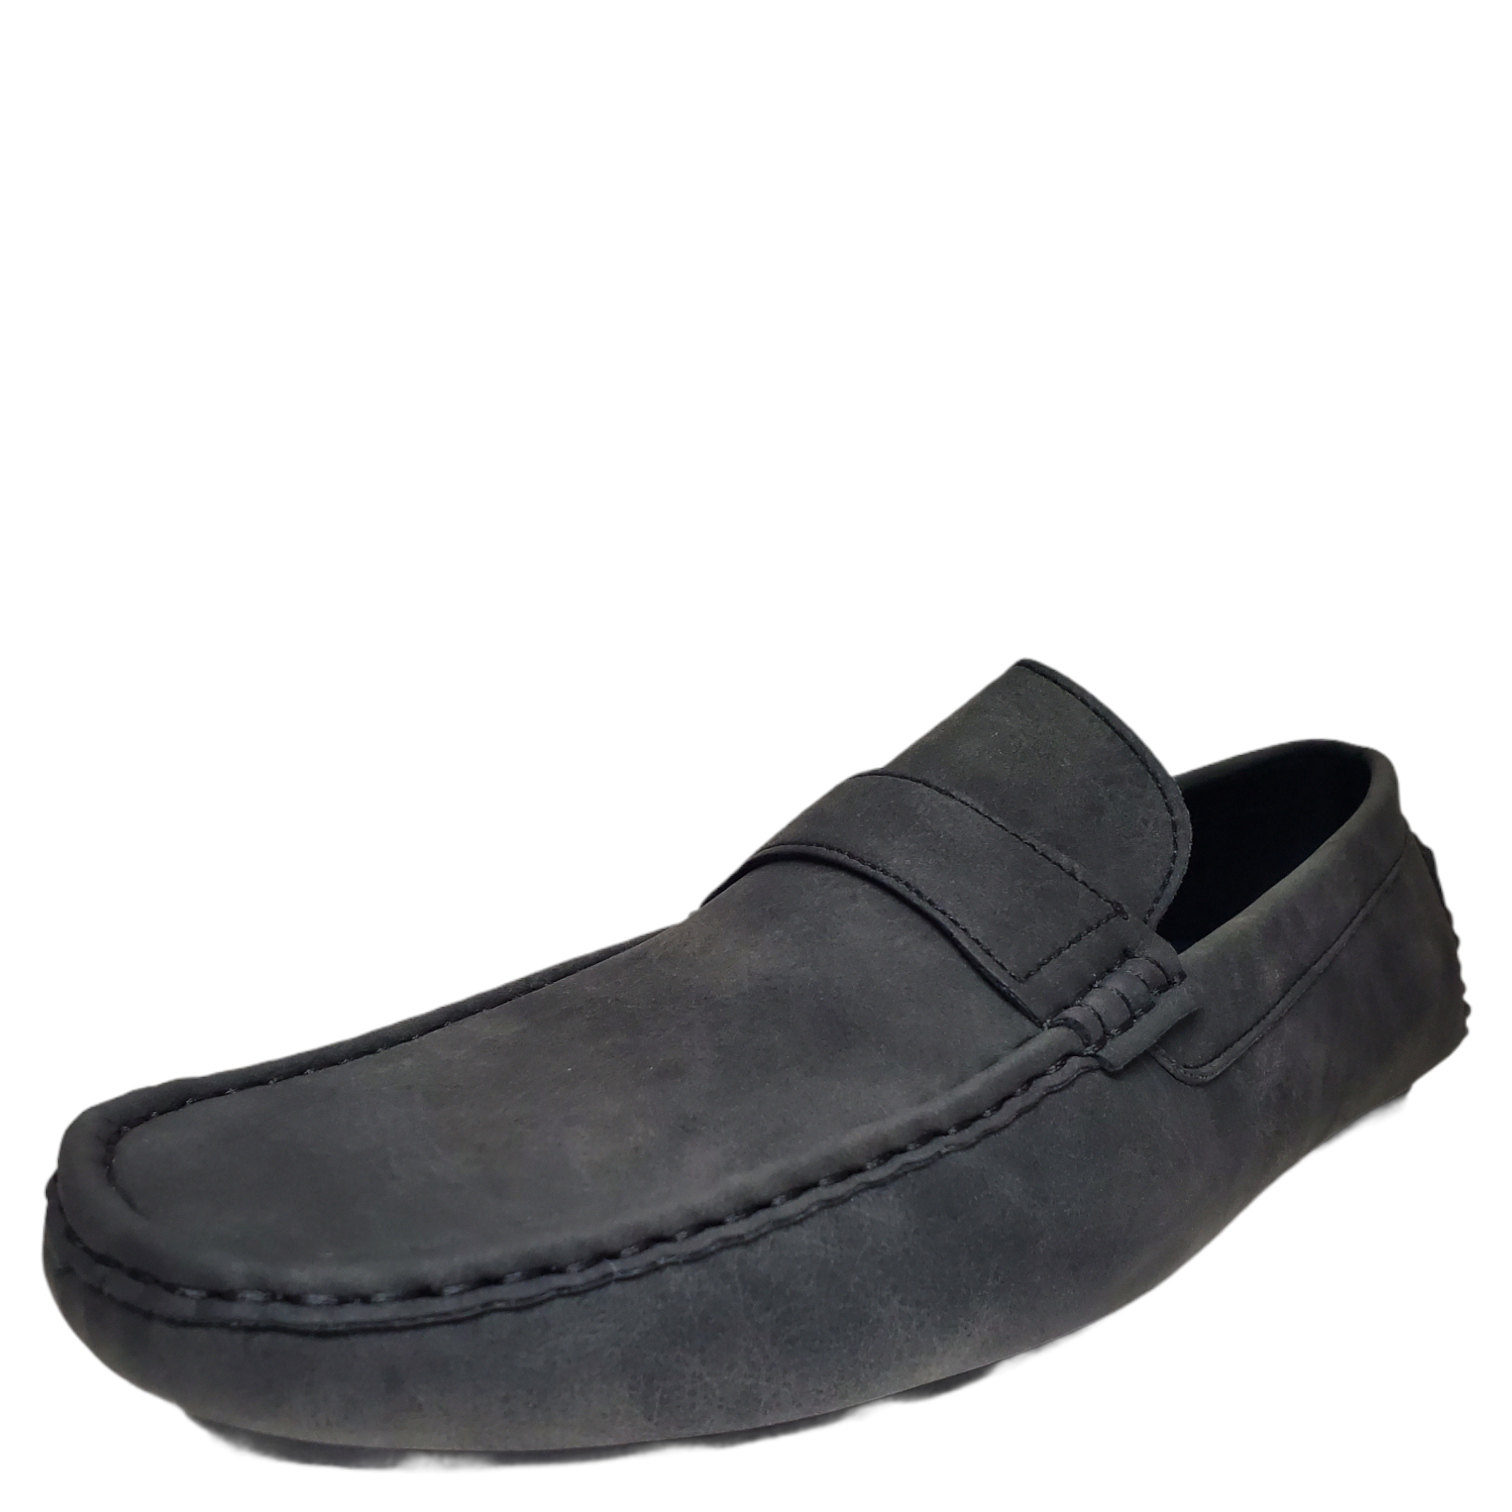 Gallery Seven Mens Casual Driver Loafers Black 12M US 11.5 UK 45 EU